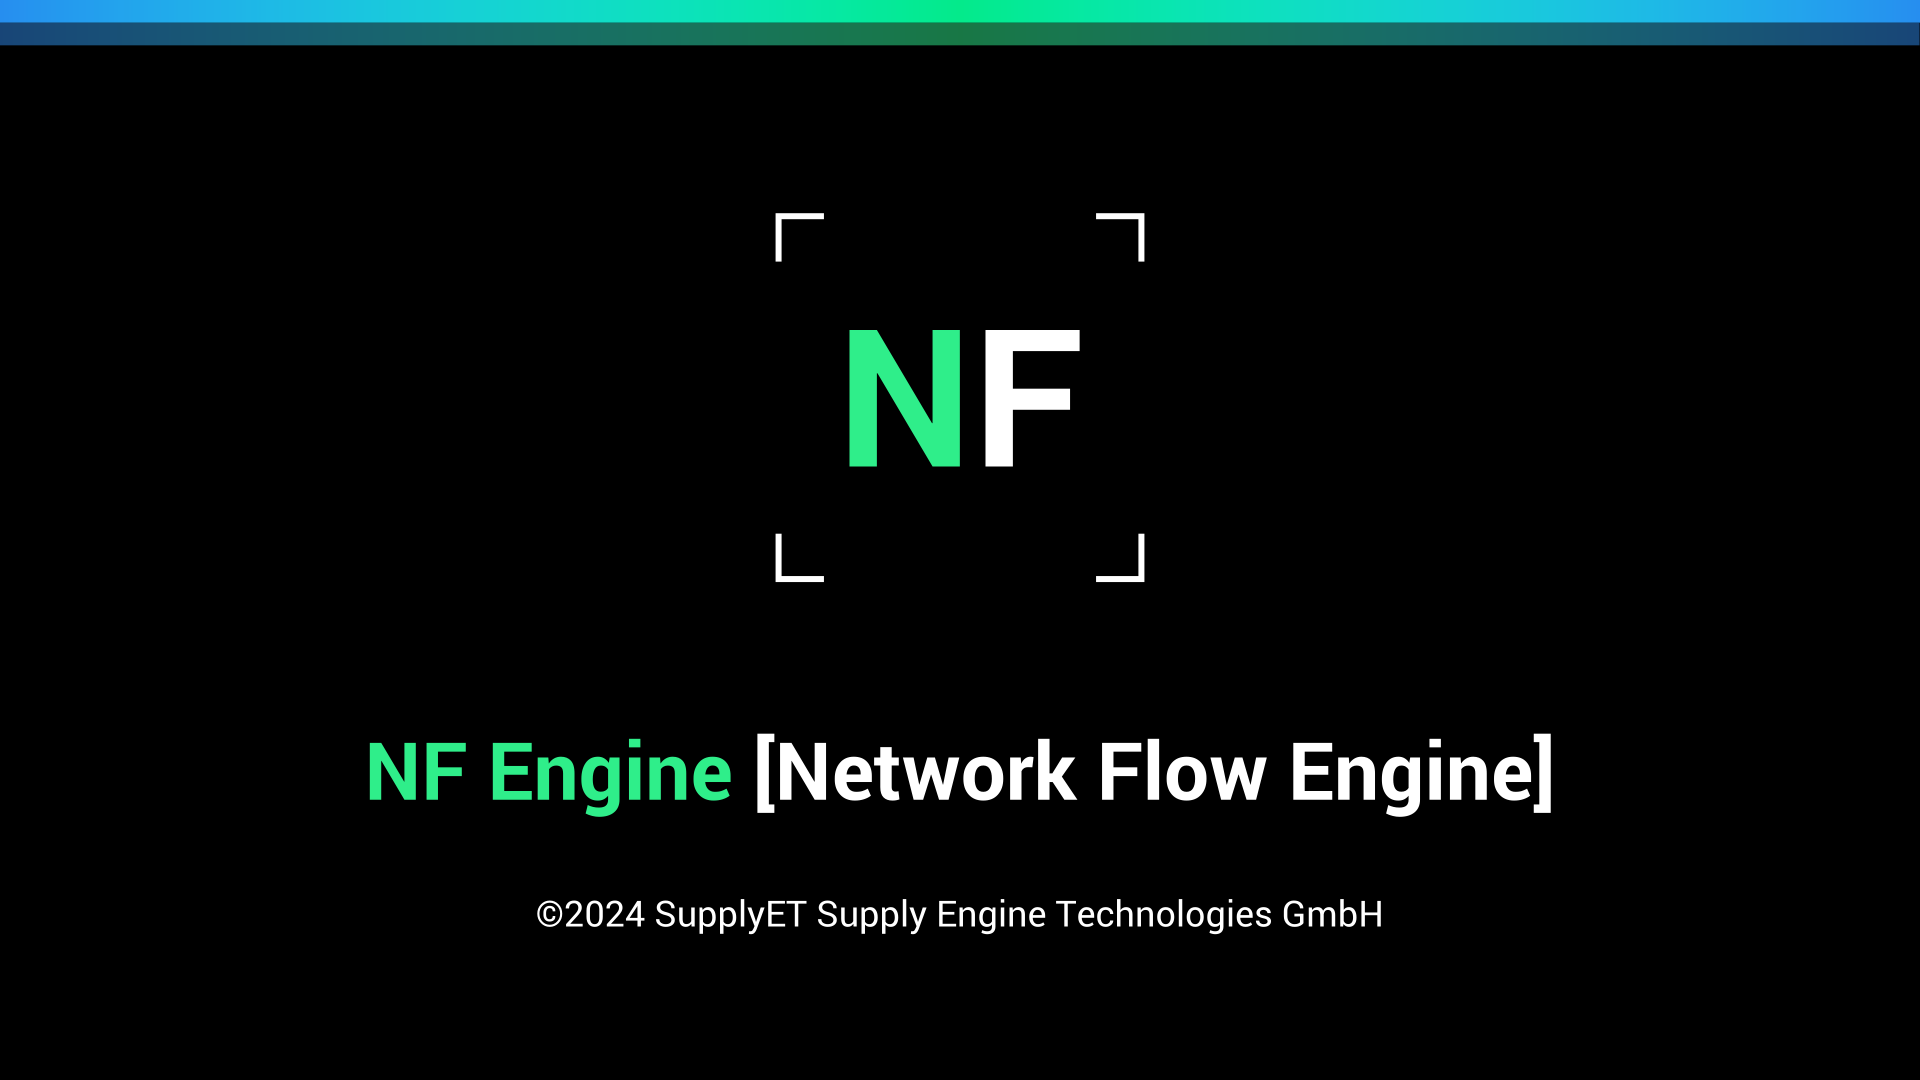 NF Engine: Image Carousel (1 of 4)